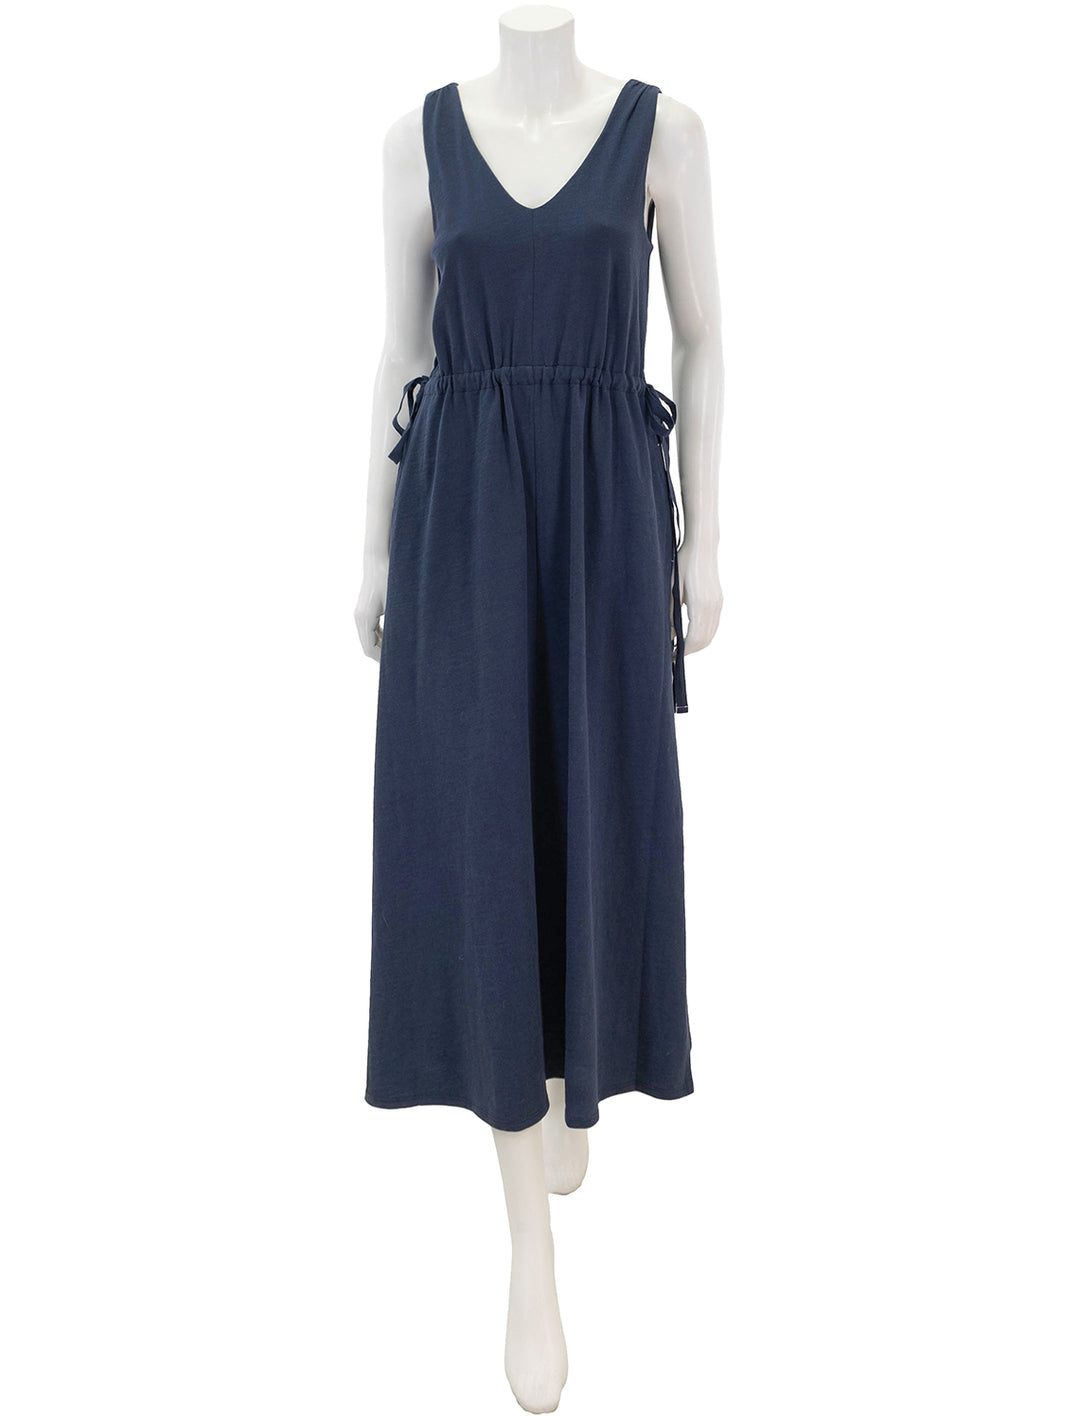 Front view of Lilla P.'s drawcord waist maxi dress in navy.